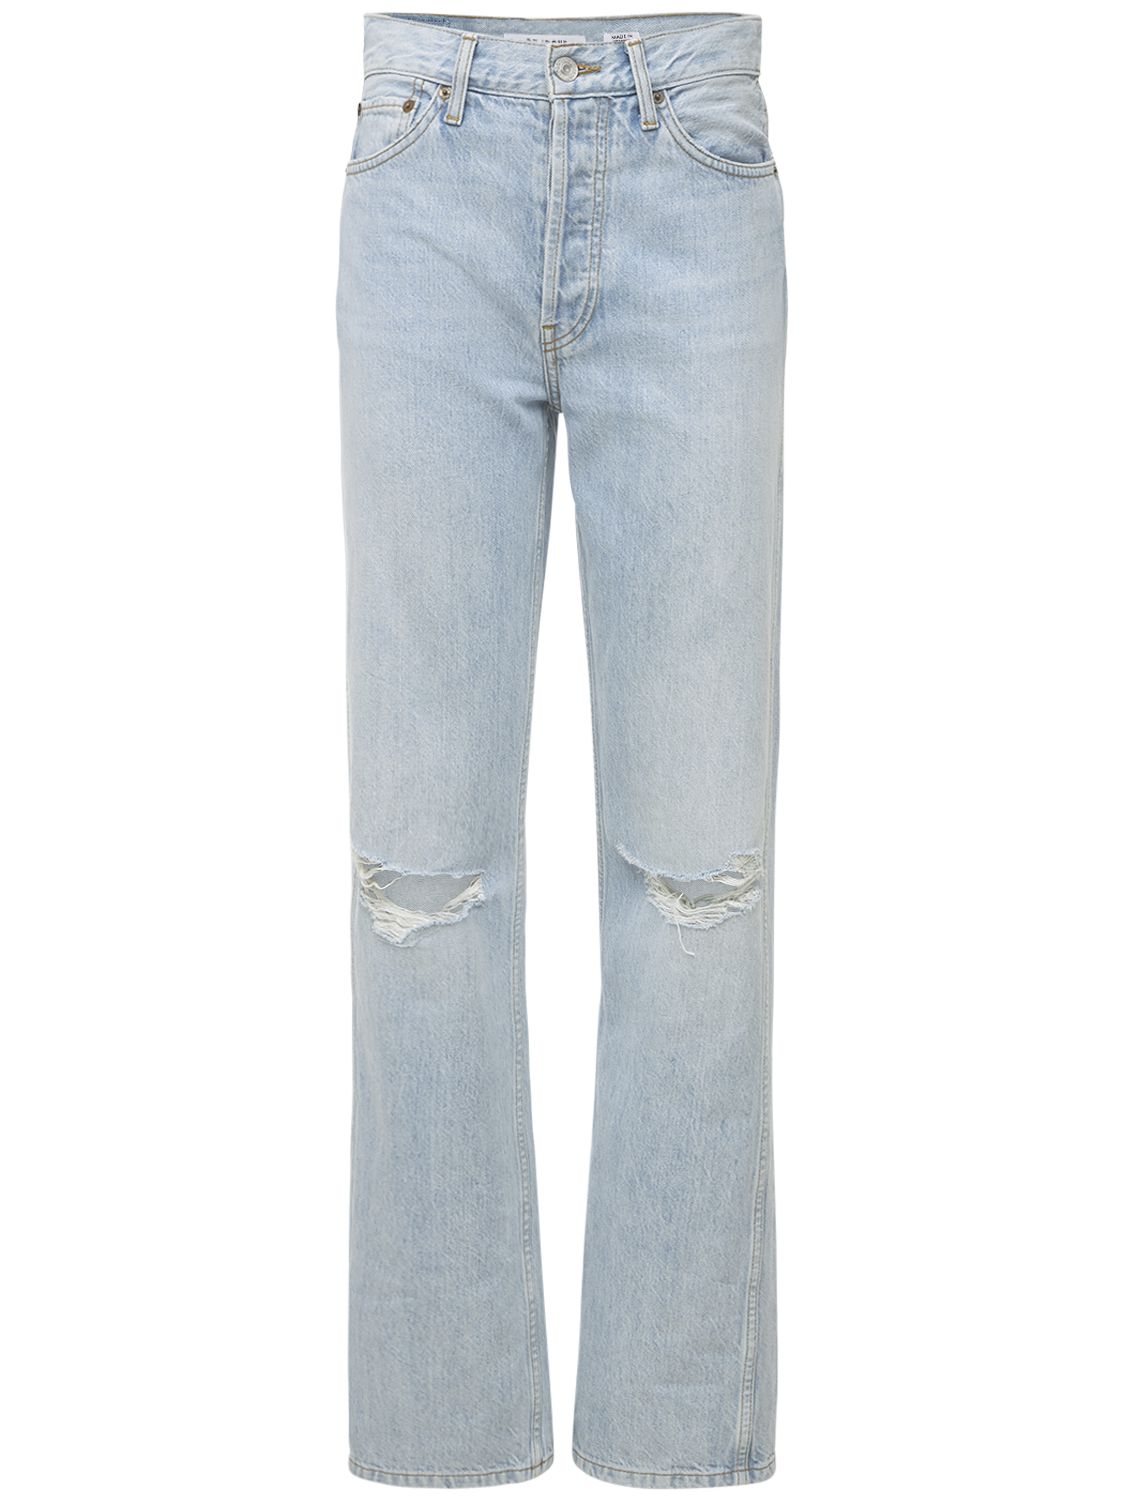 90s High-rise Distressed Loose Jeans